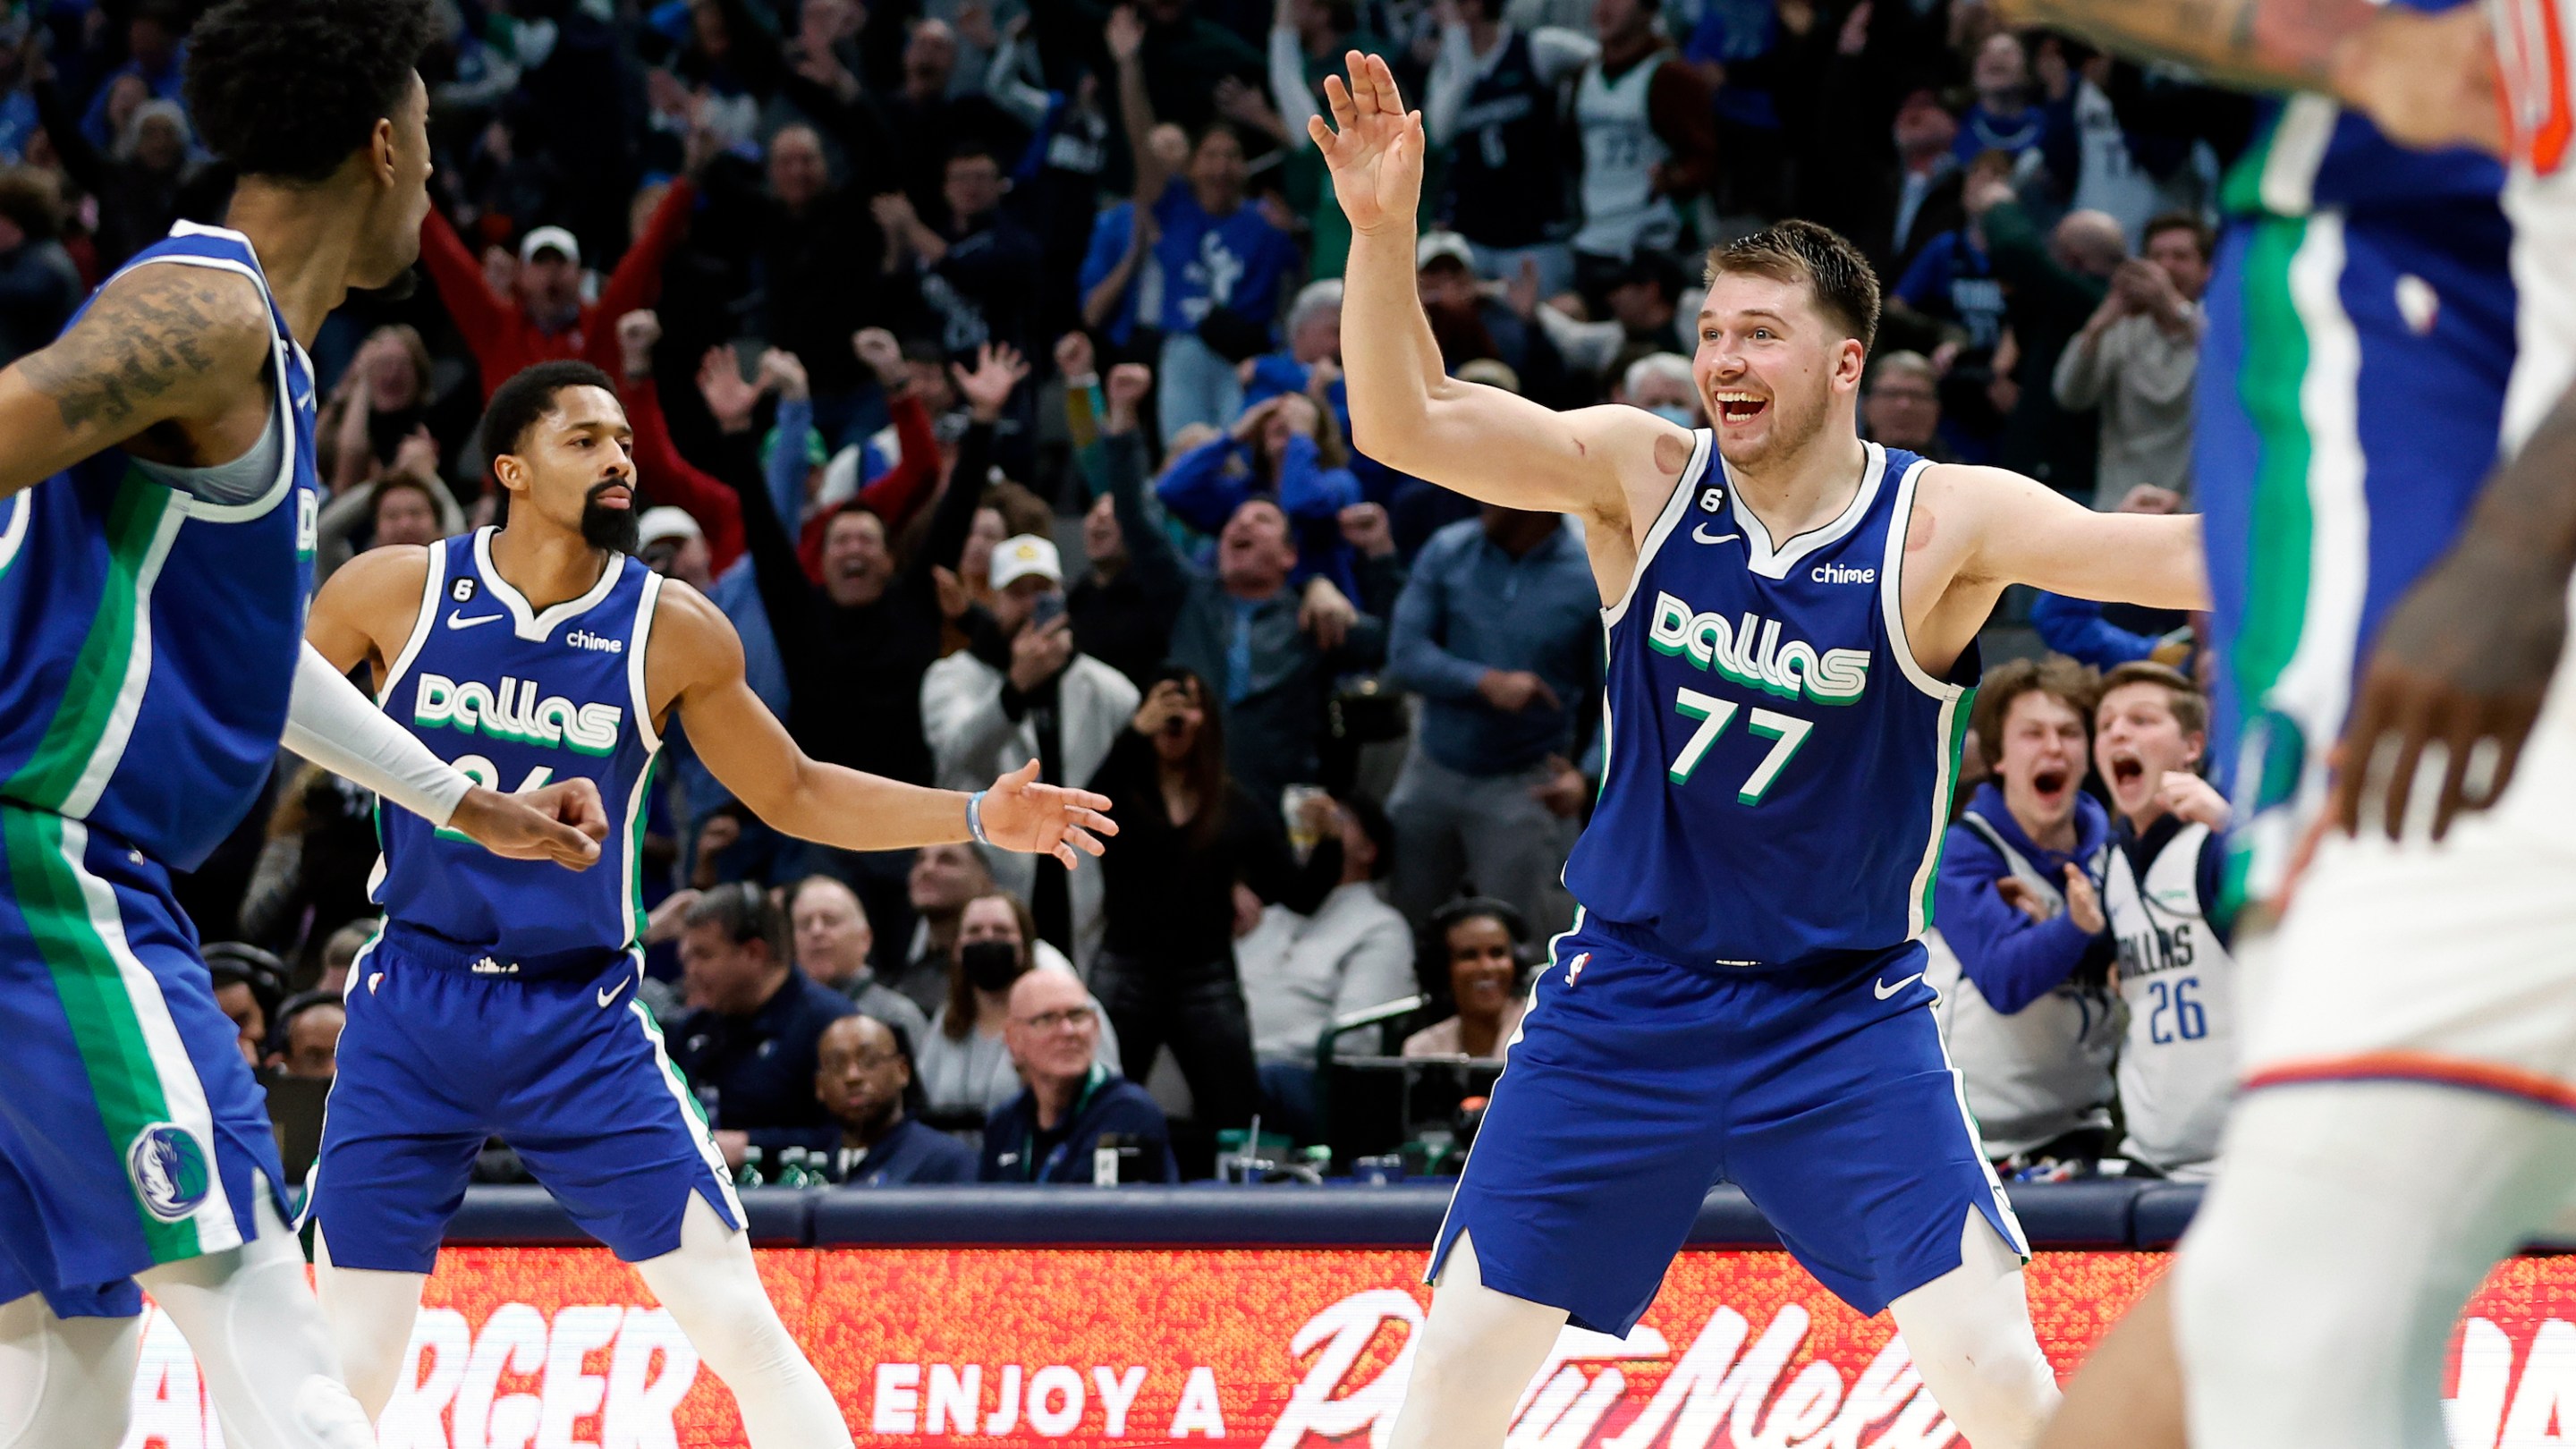 Luka Doncic #77 of the Dallas Mavericks reacts after making the game tying basket against the New York Knicks with one second left in regulation to send the game to overtime at American Airlines Center on December 27, 2022 in Dallas, Texas.